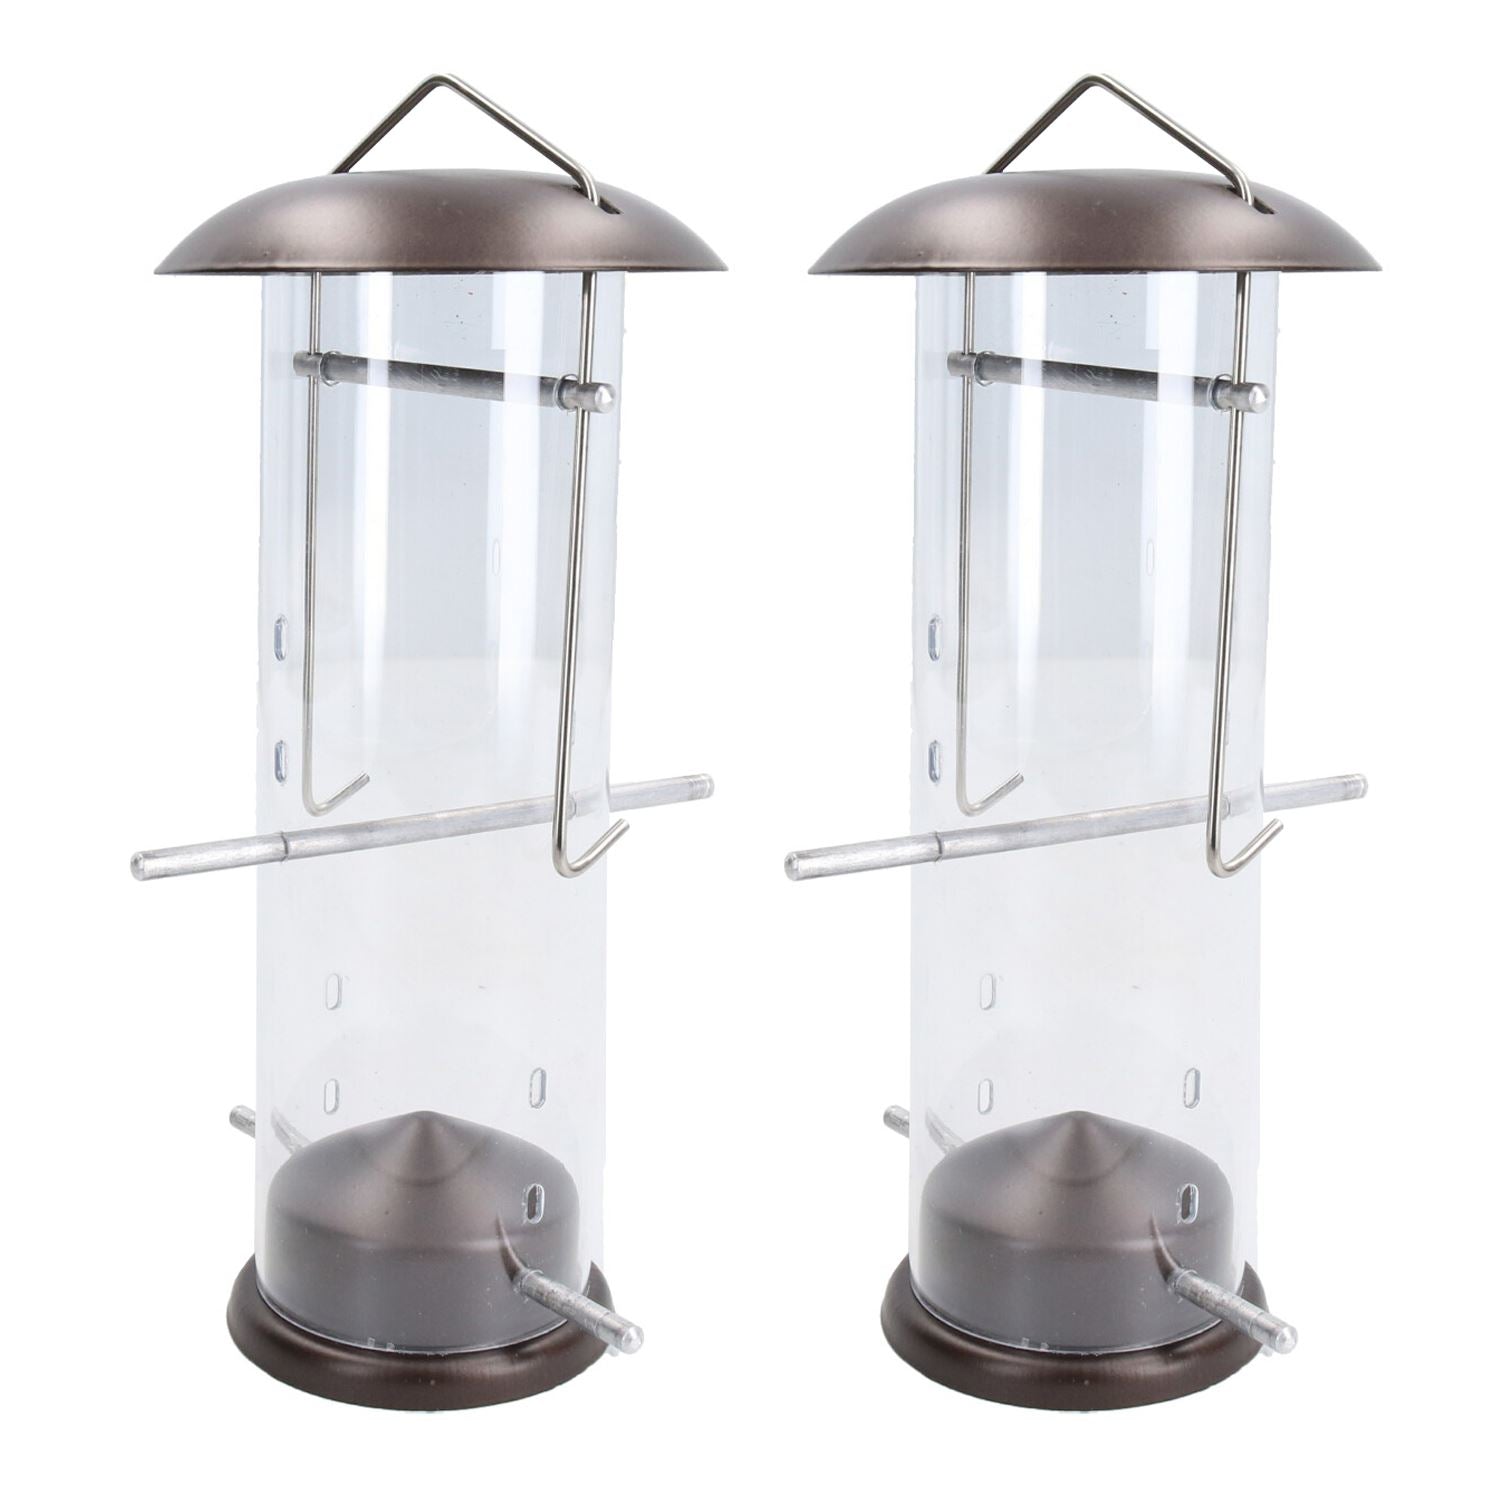 2PK Small Deluxe Bird Feeder Nyjer Seed Holder Hanging Feed Station Wild Birds